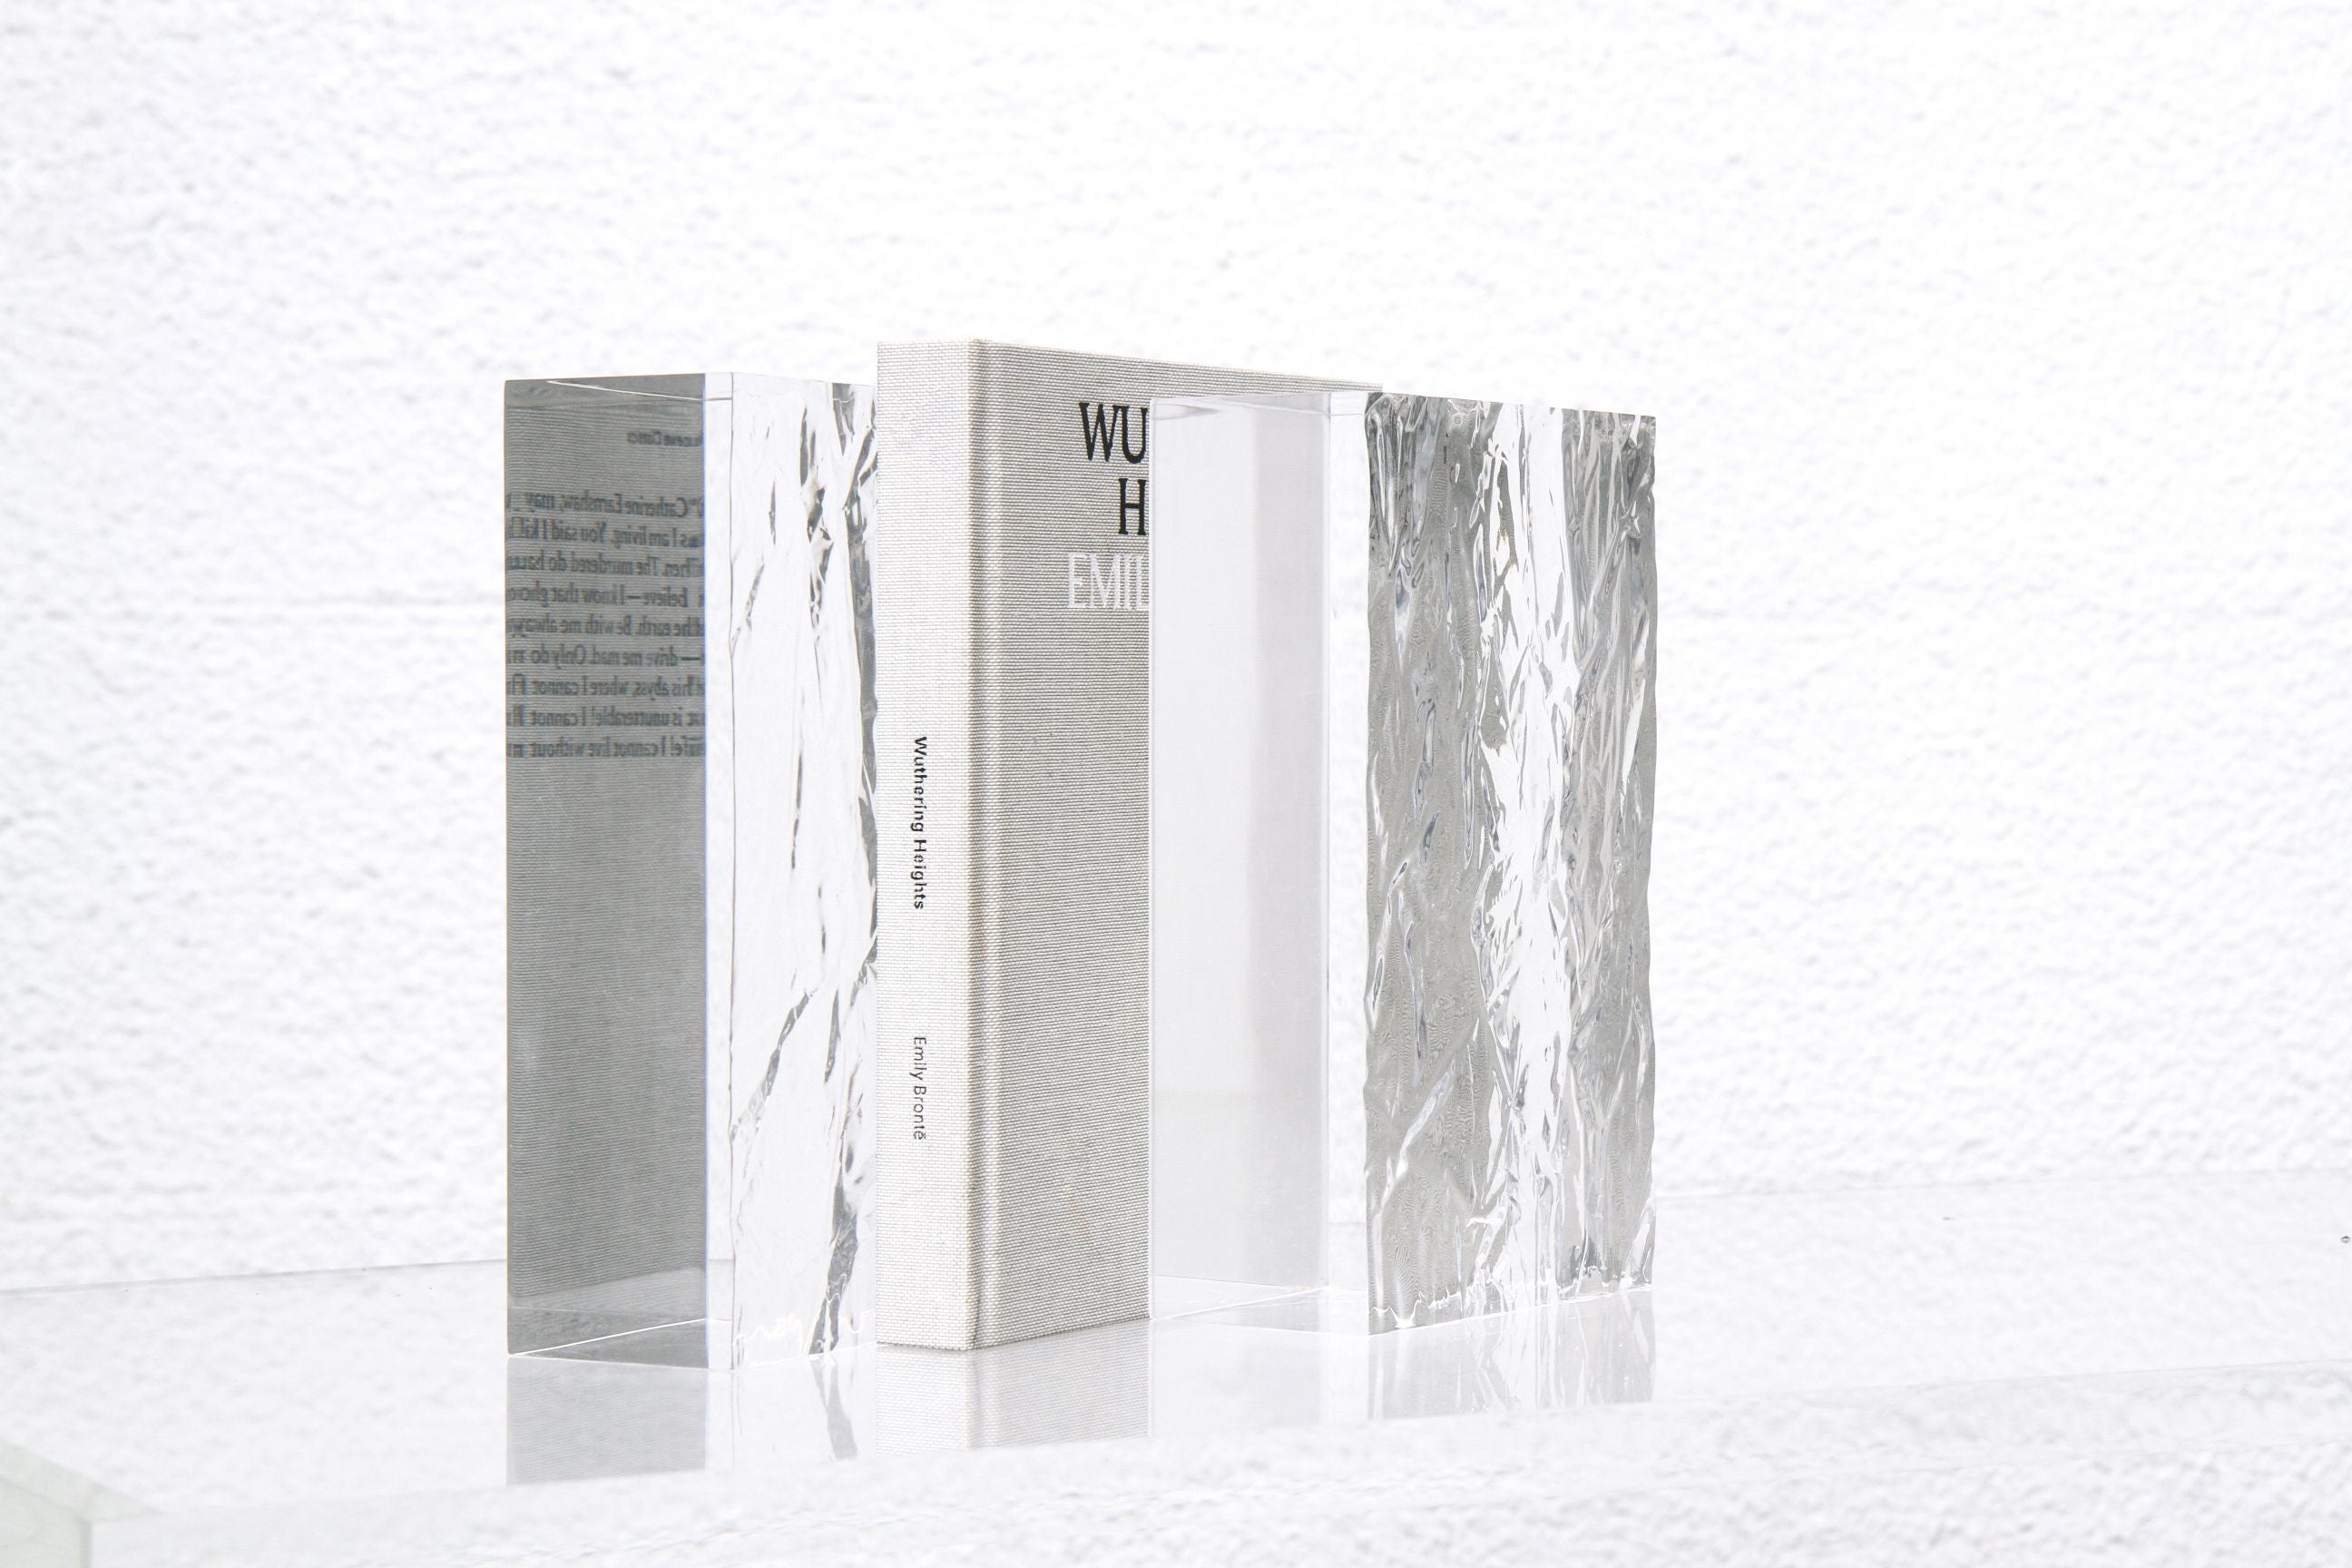 The CRUSHED ICE bookends